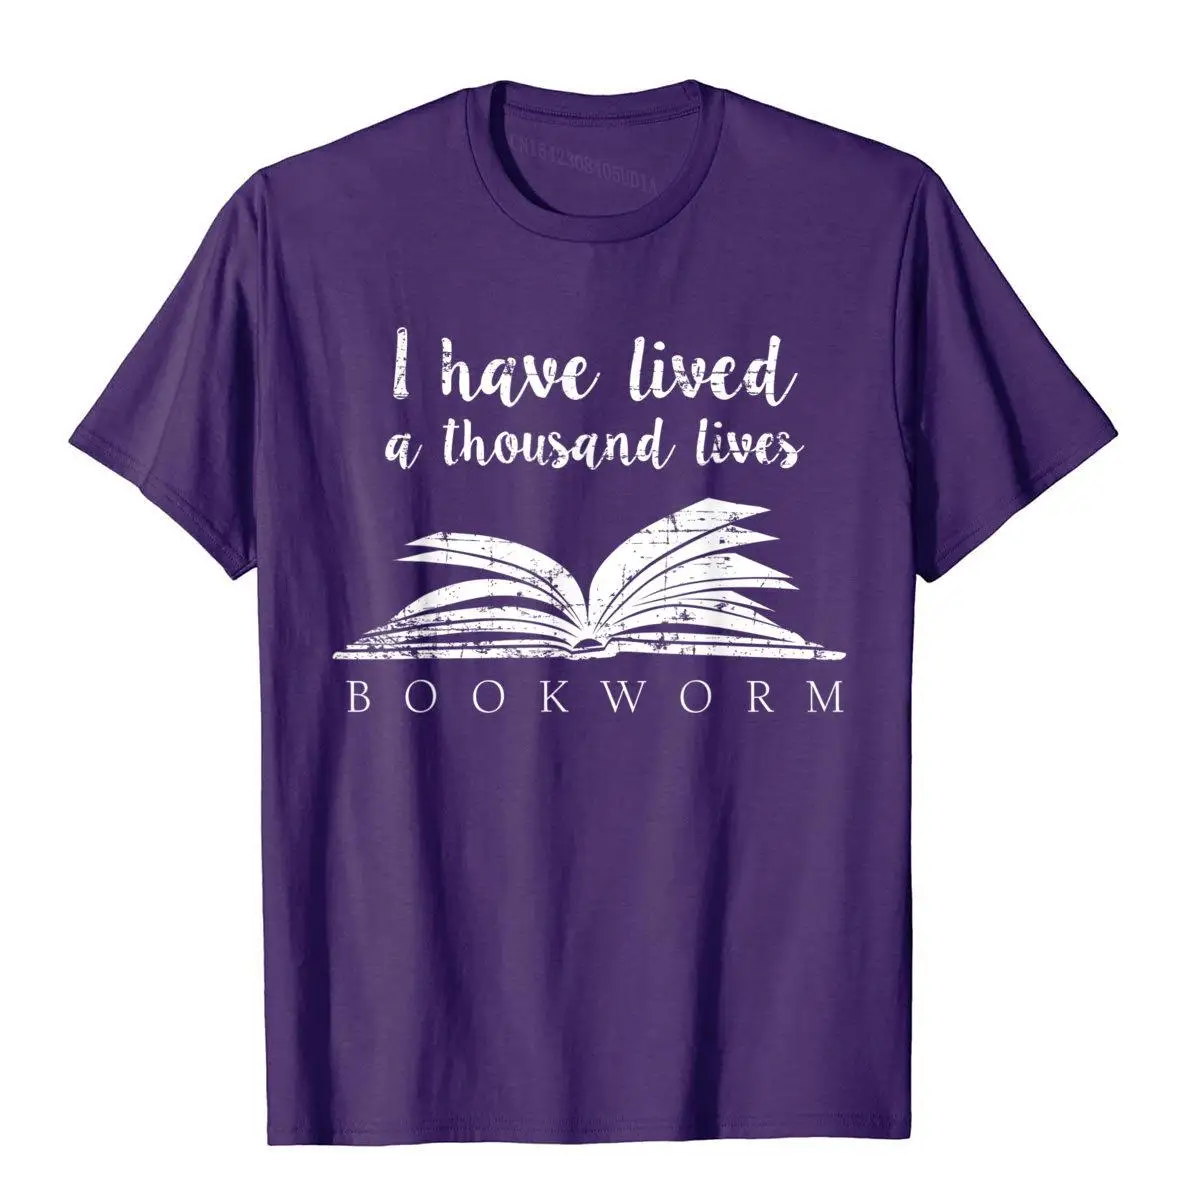 I Have Lived a Thousand Lives T-Shirt Bookworm Reading Book__A10198purple